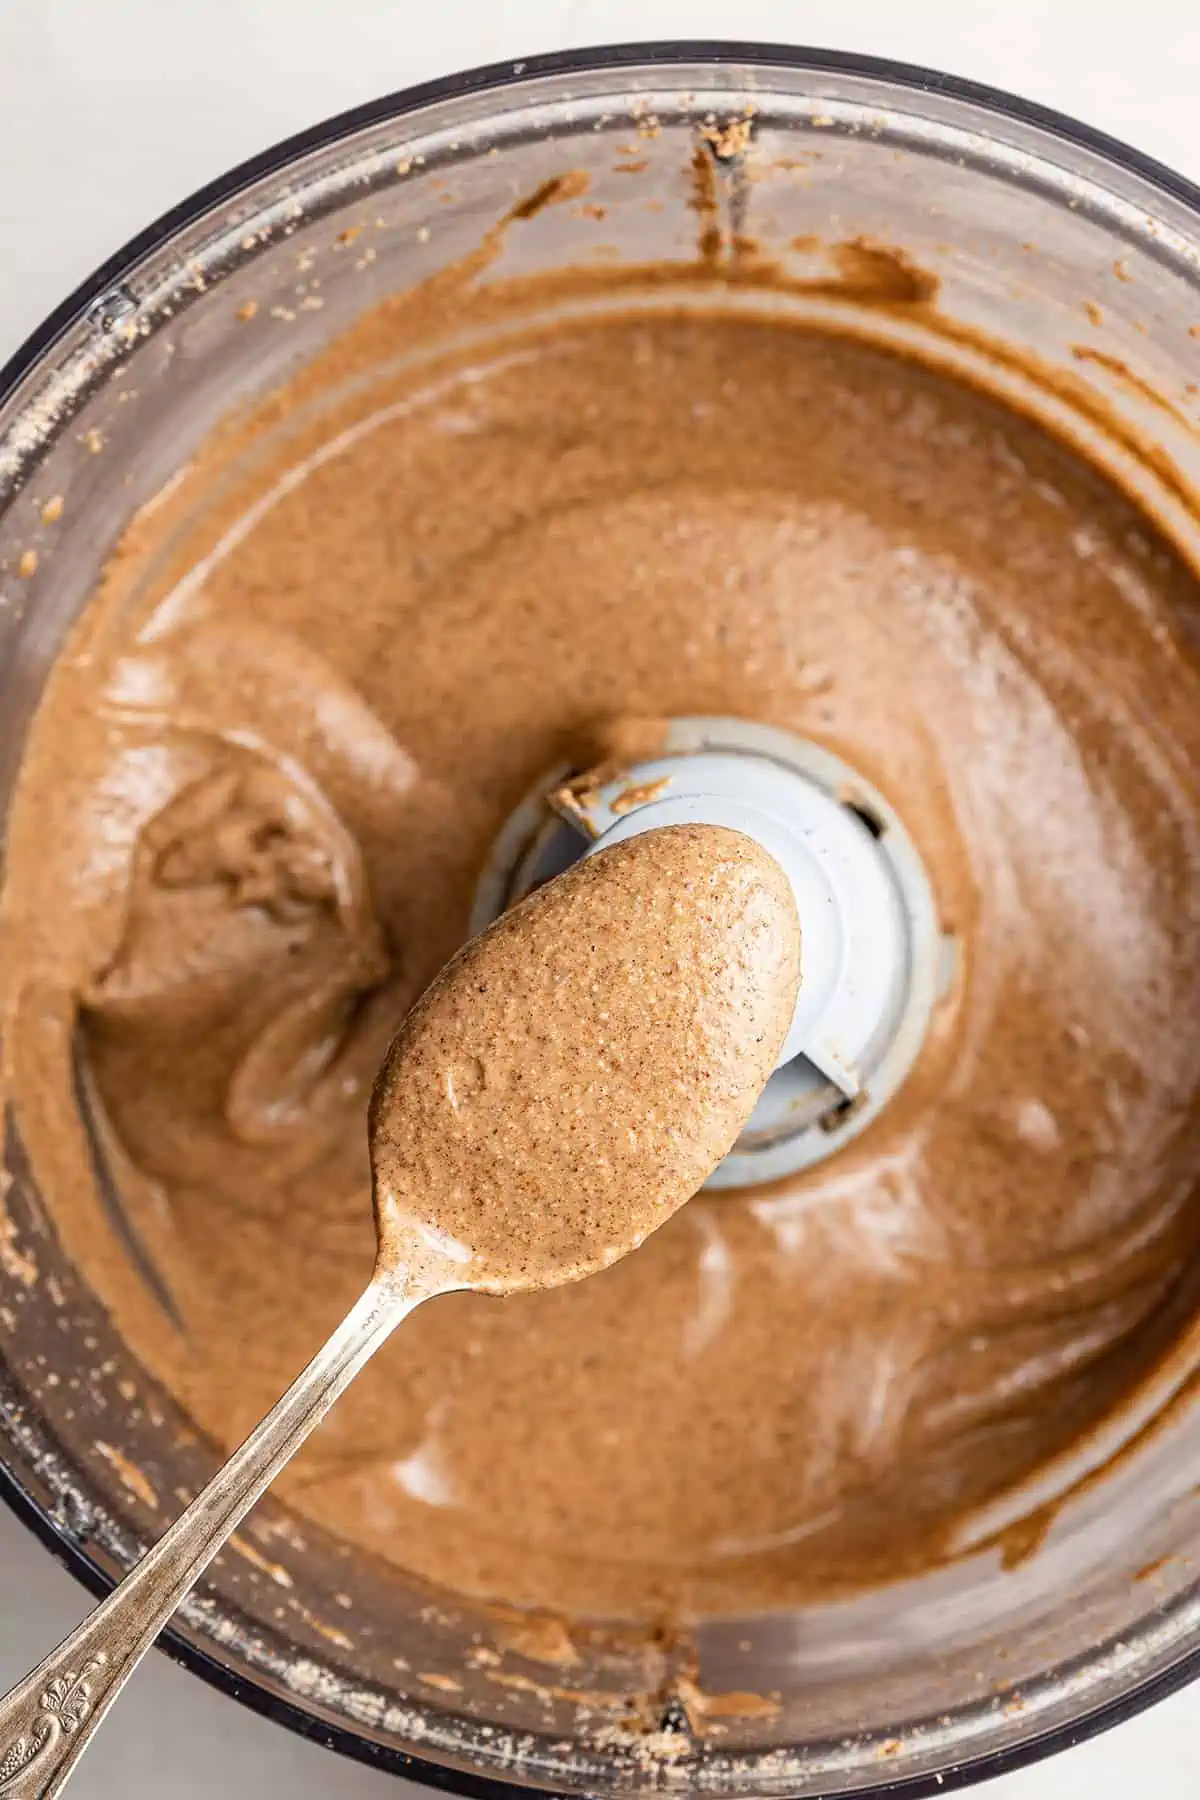 A spoon filled with pumpkin spice almond butter, above an open food processor filled with pumpkin spice almond butter